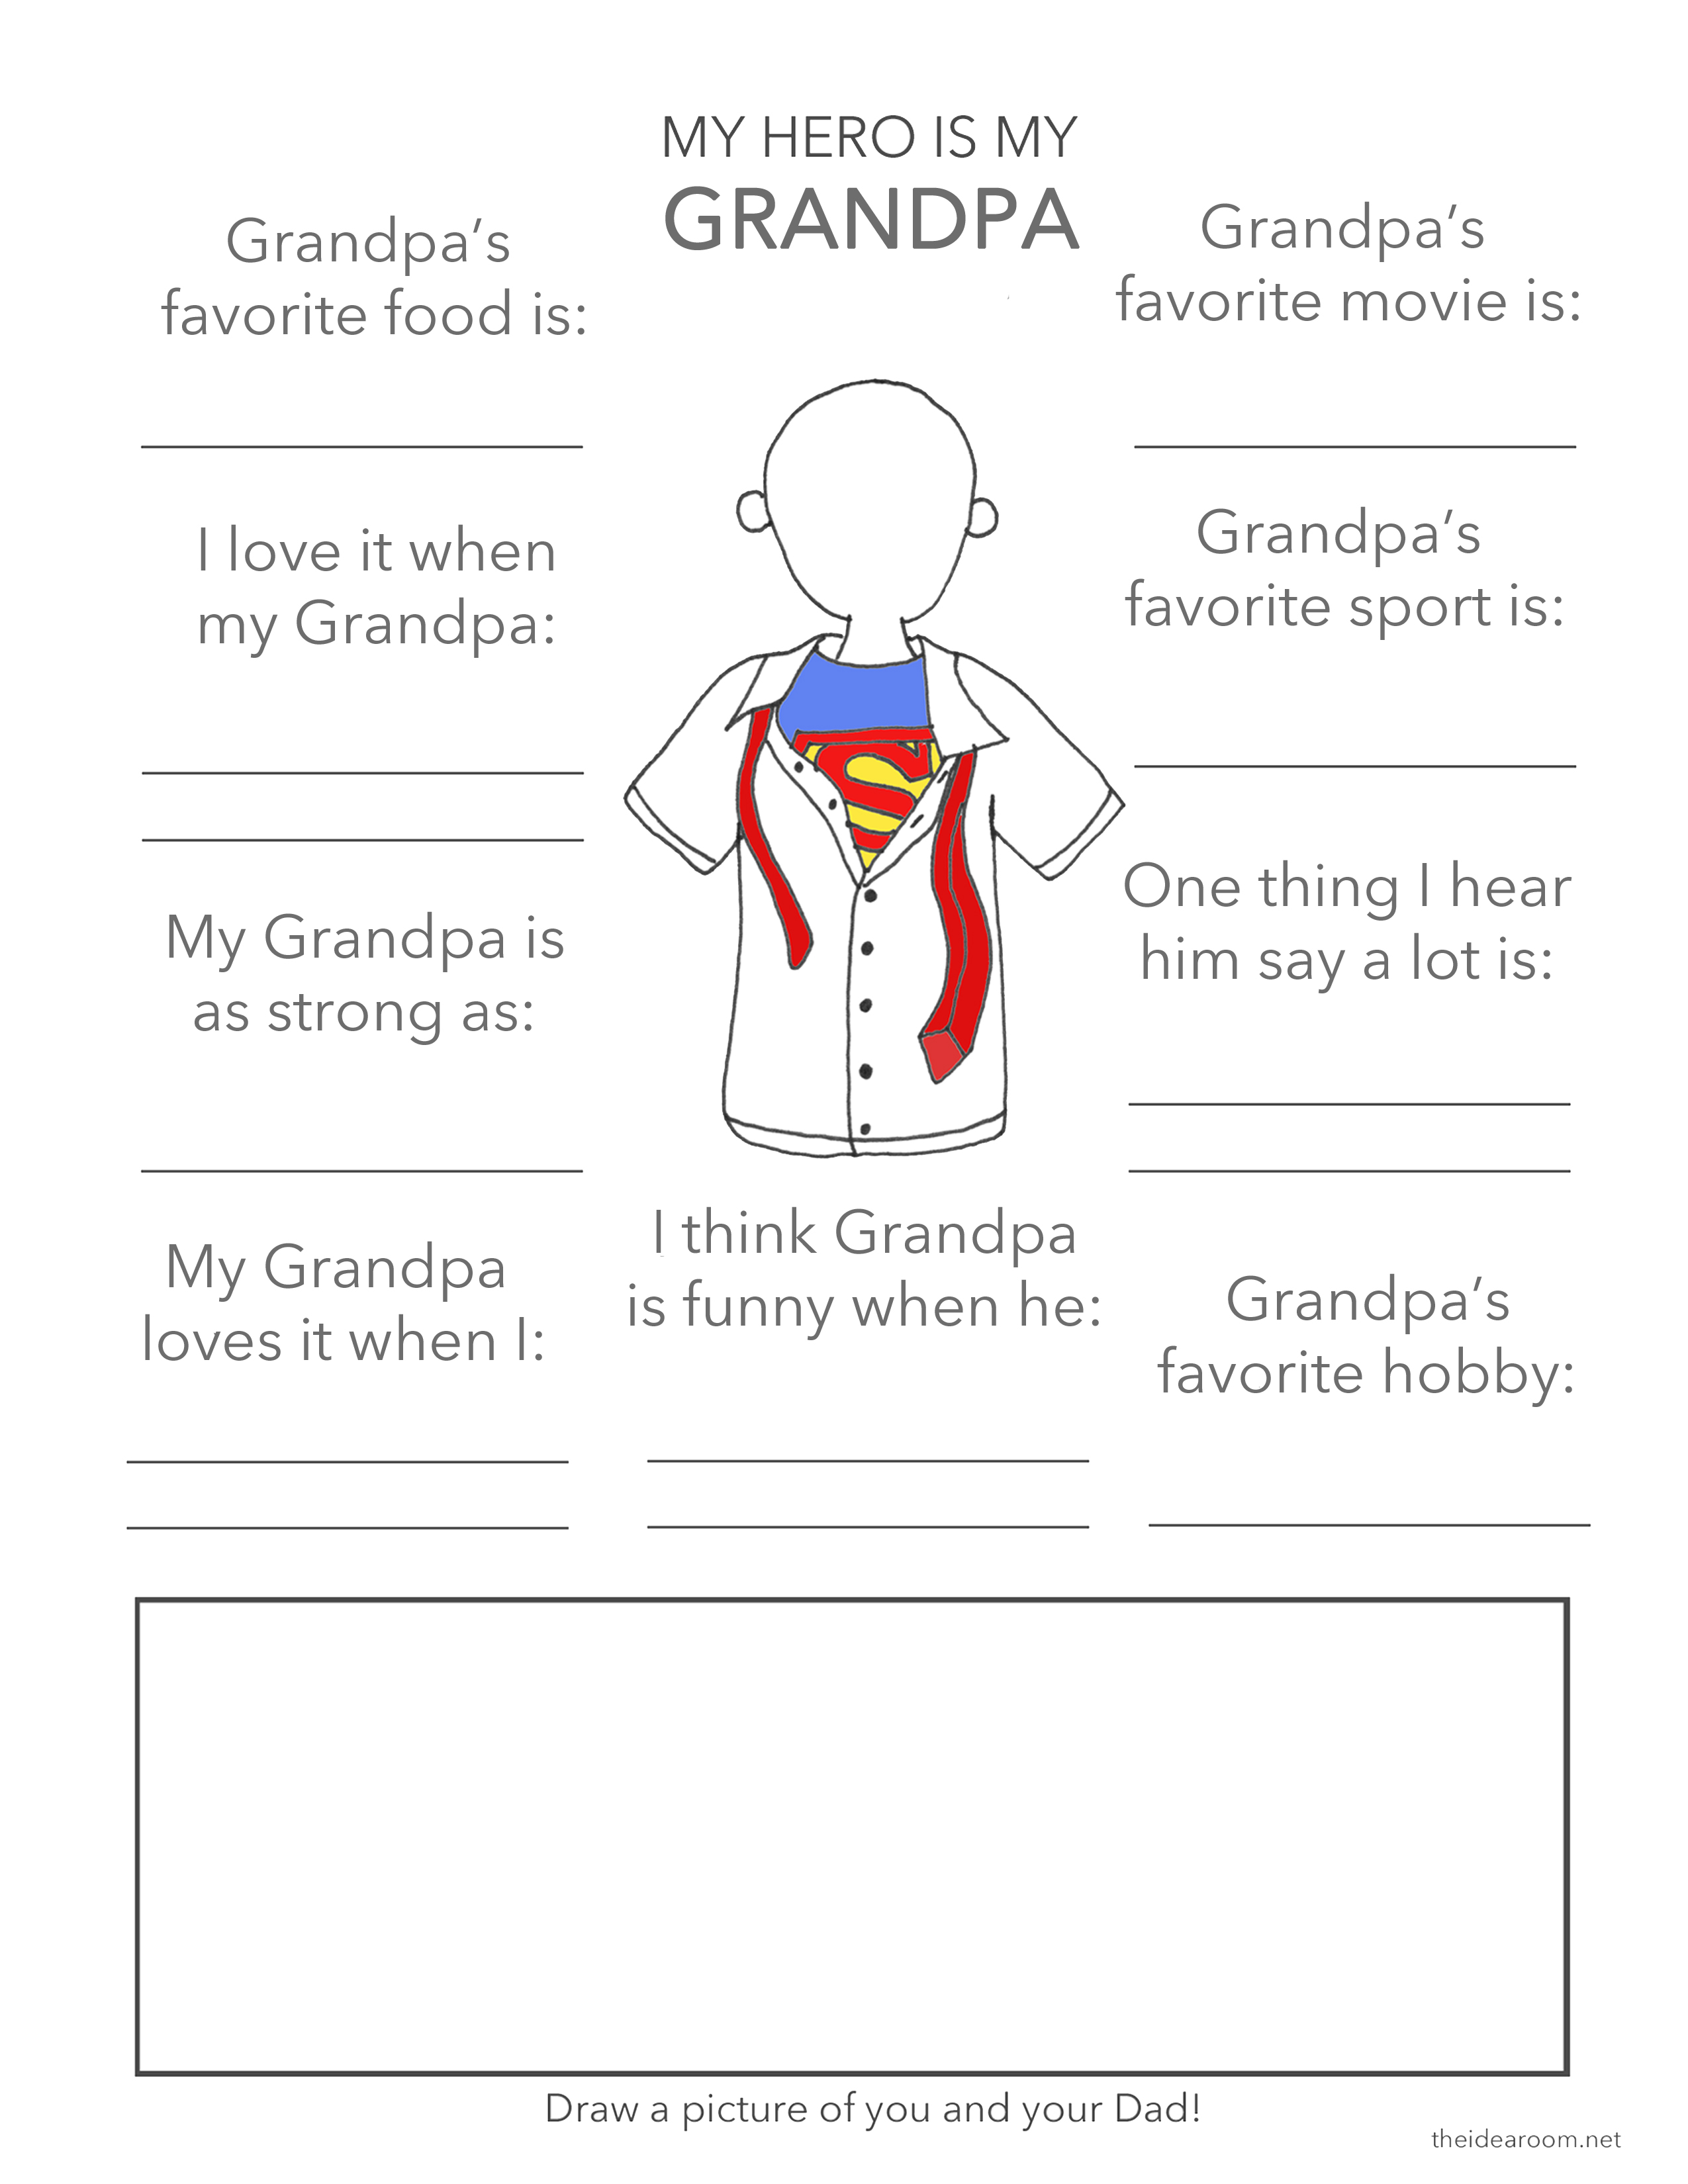 Download Free Father's Day Printable Fun Fact Sheet